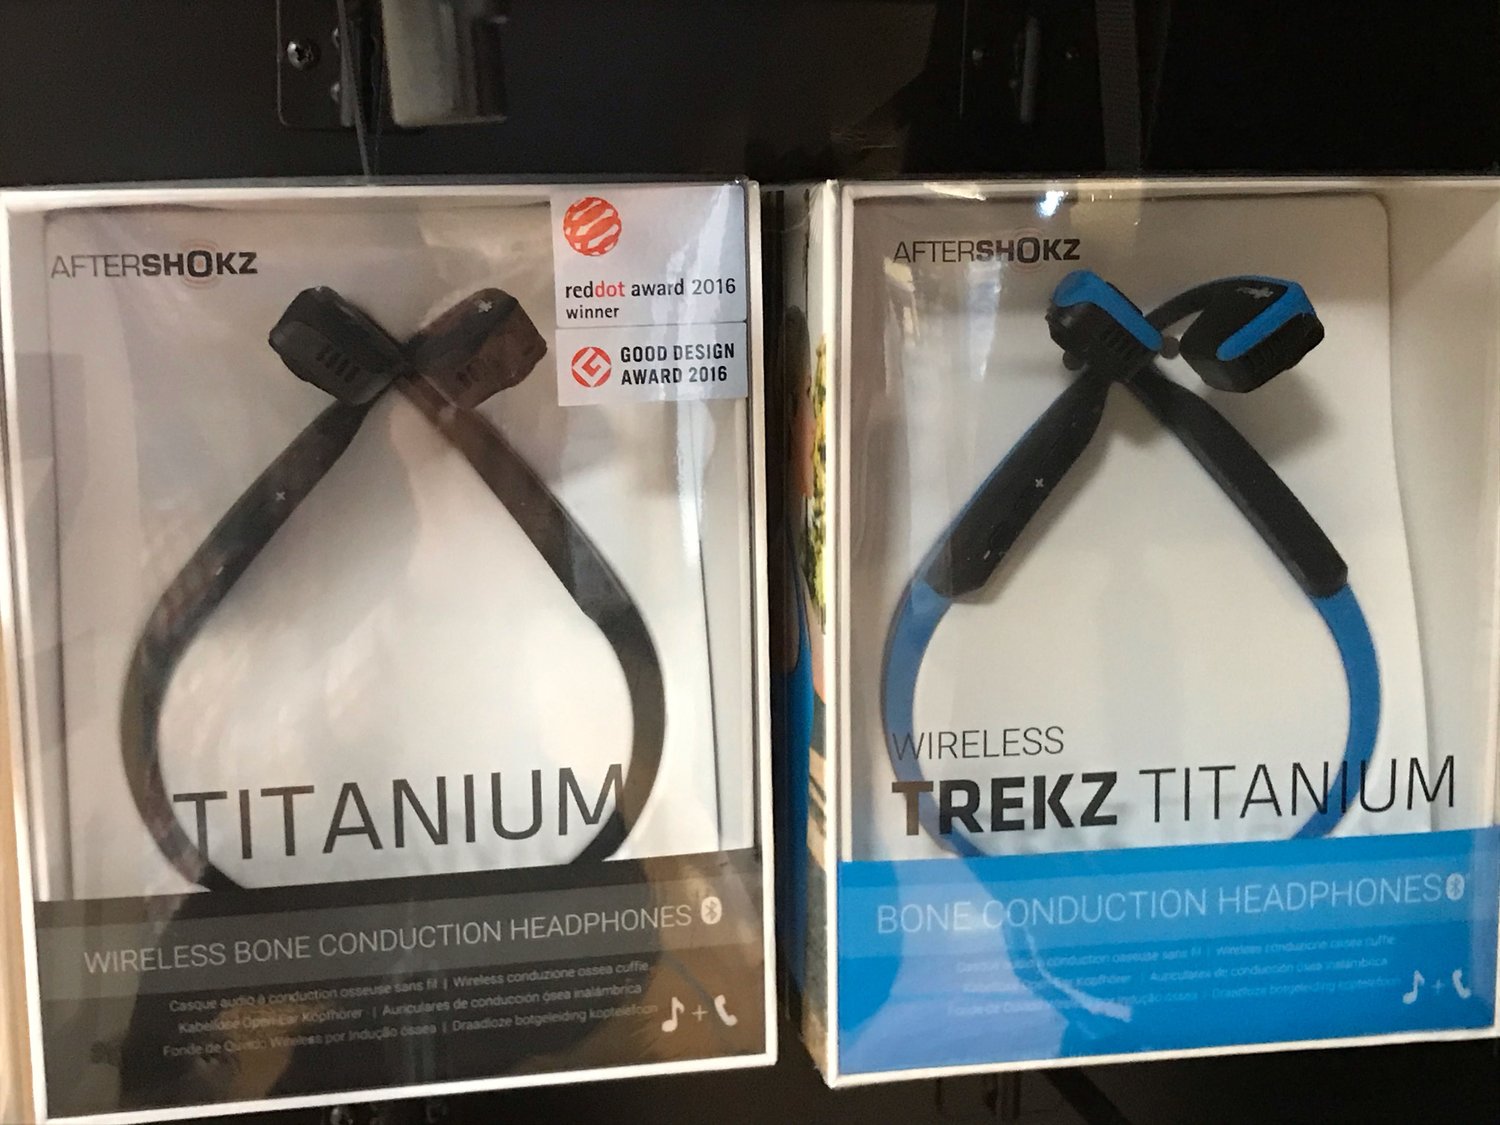 For the quarantine pounds: Aftershokz Headphones allow you to listen to music while still hearing traffic, at Sayville Running Company $79-$99 (49 Main Street, Sayville).